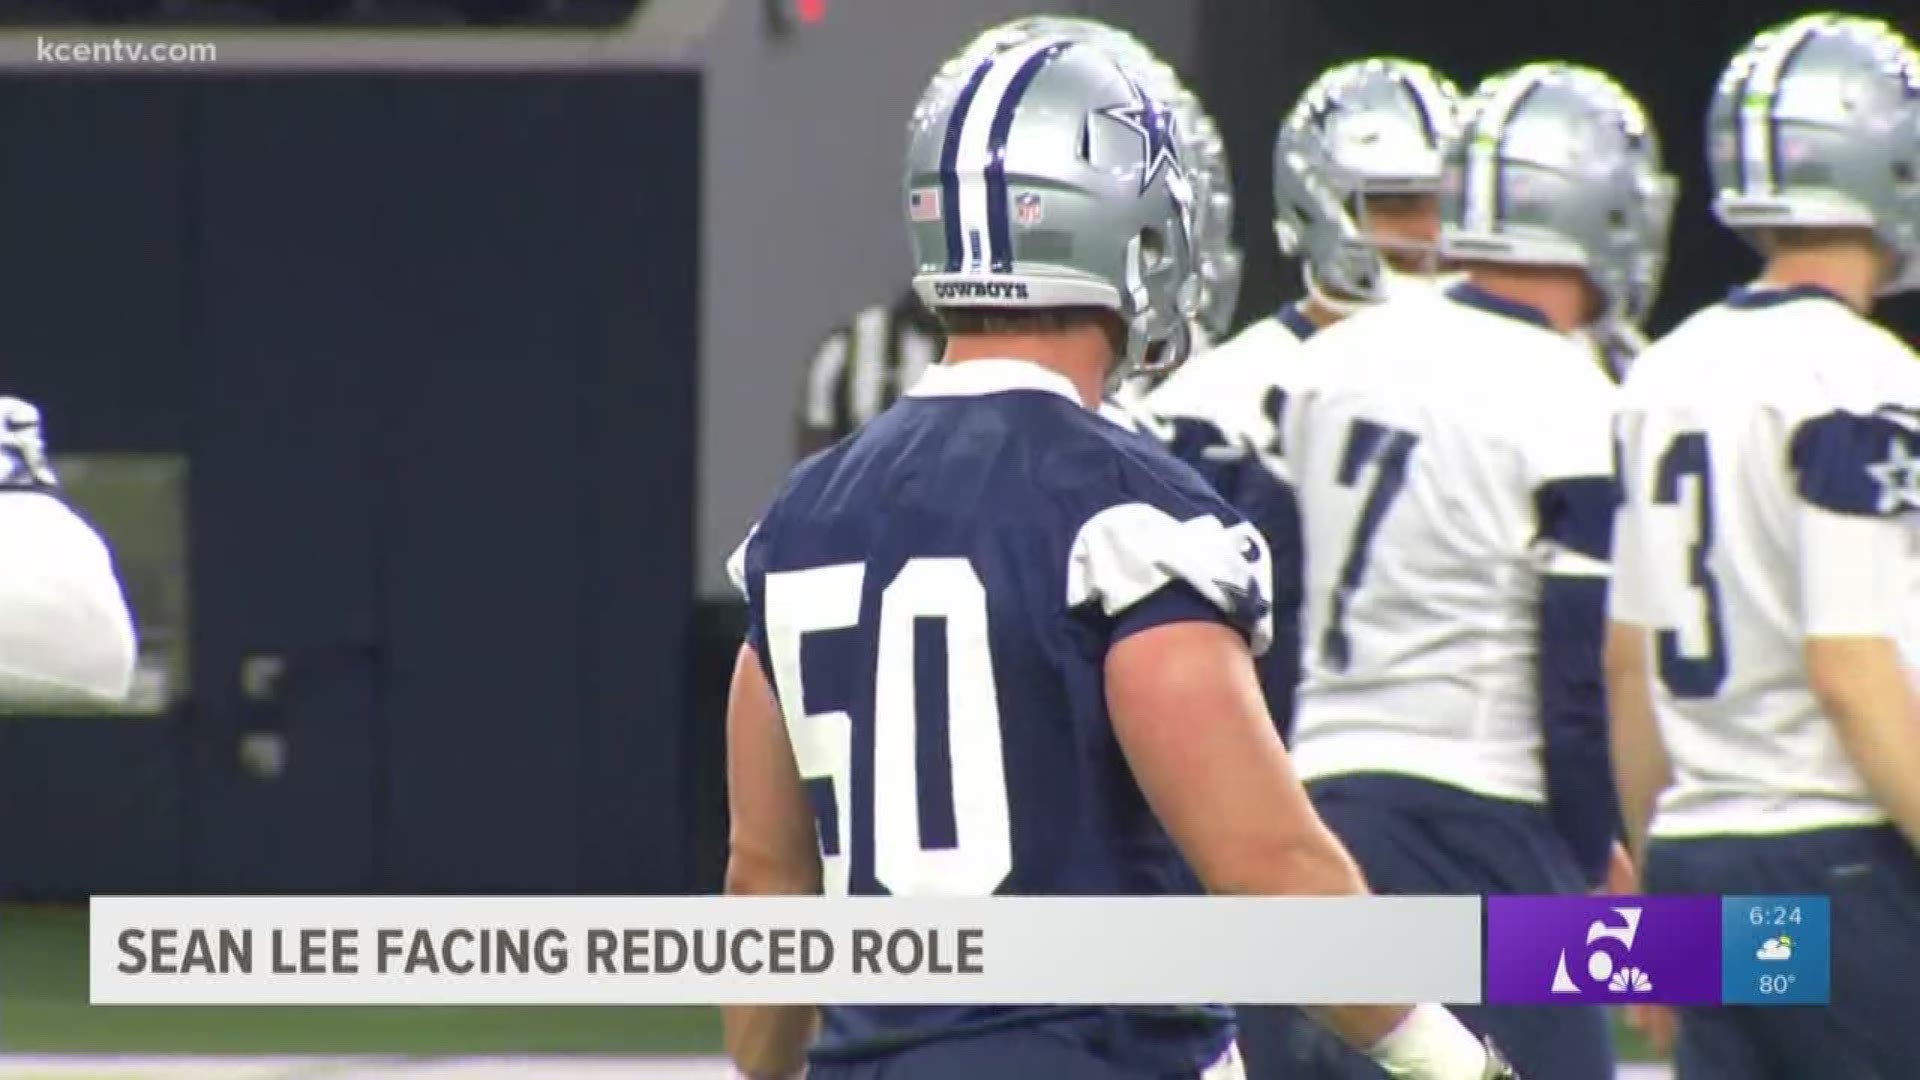 Linebacker Sean Lee is notorious for getting injured, so the Cowboys are being cautious with him. Head coach Jason Garrett says Lee is still a great leader.